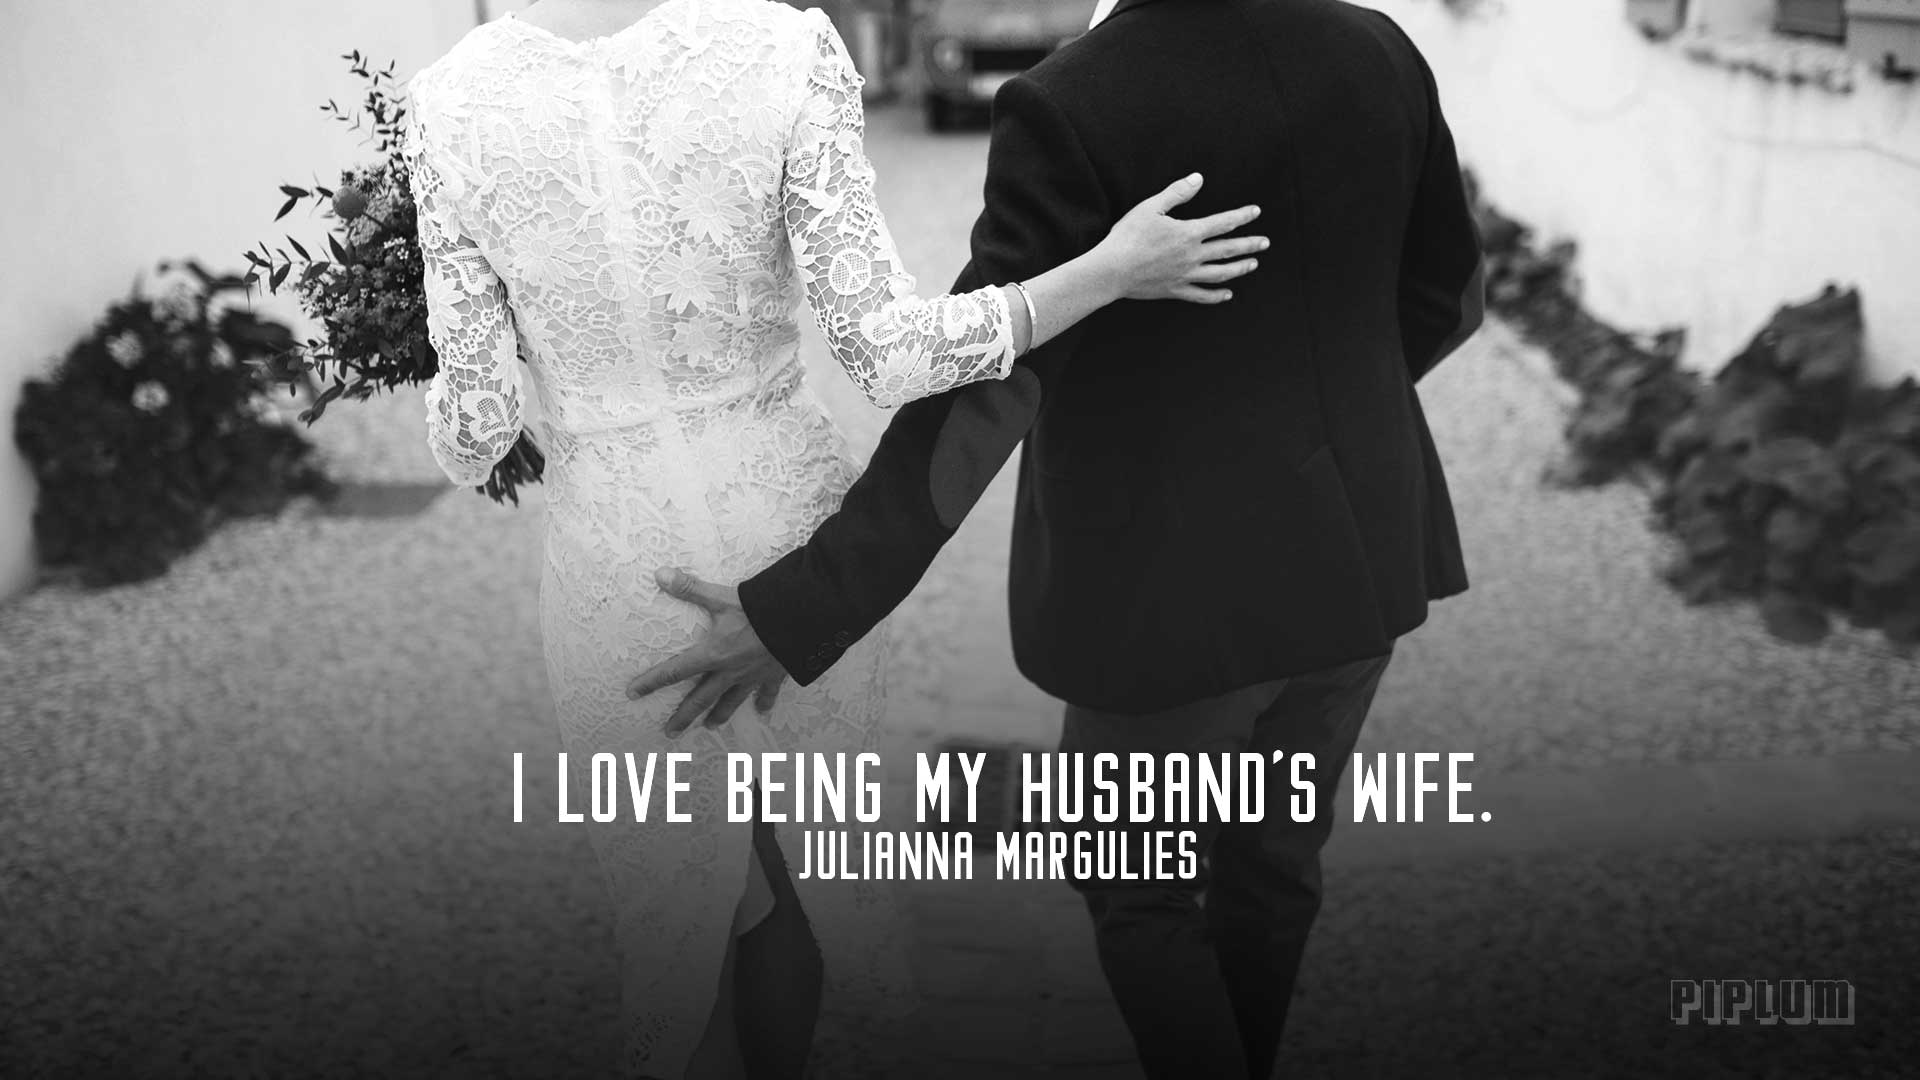 Download This Love Poster In High Quality - Love Being My Husband's Wife , HD Wallpaper & Backgrounds